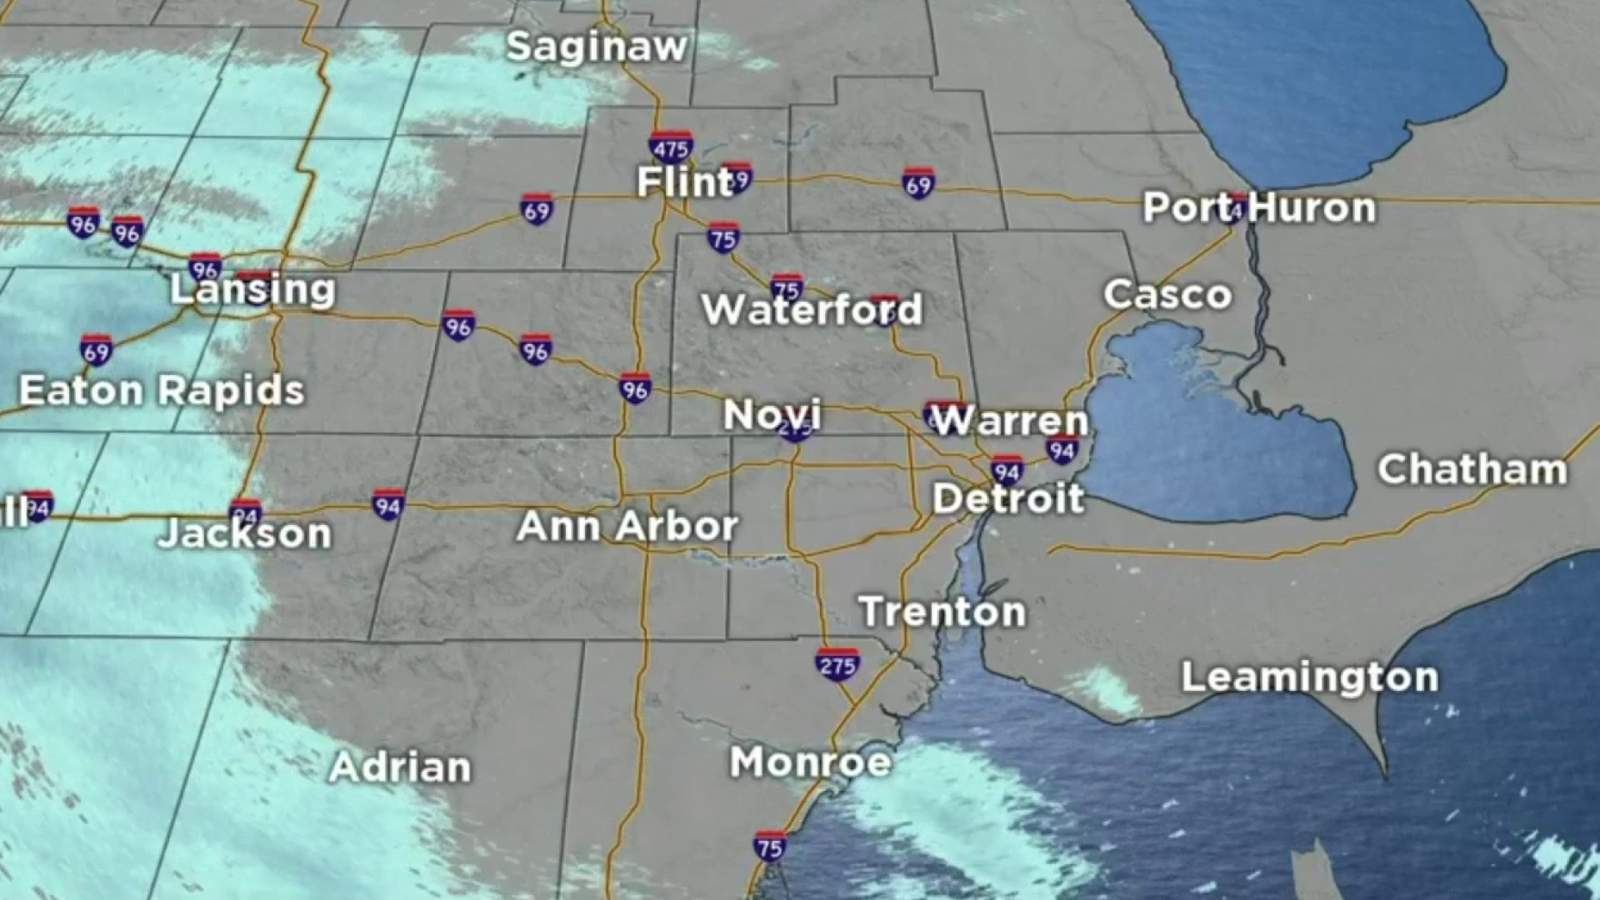 Metro Detroit weather: Cold with flurries, light snow Sunday